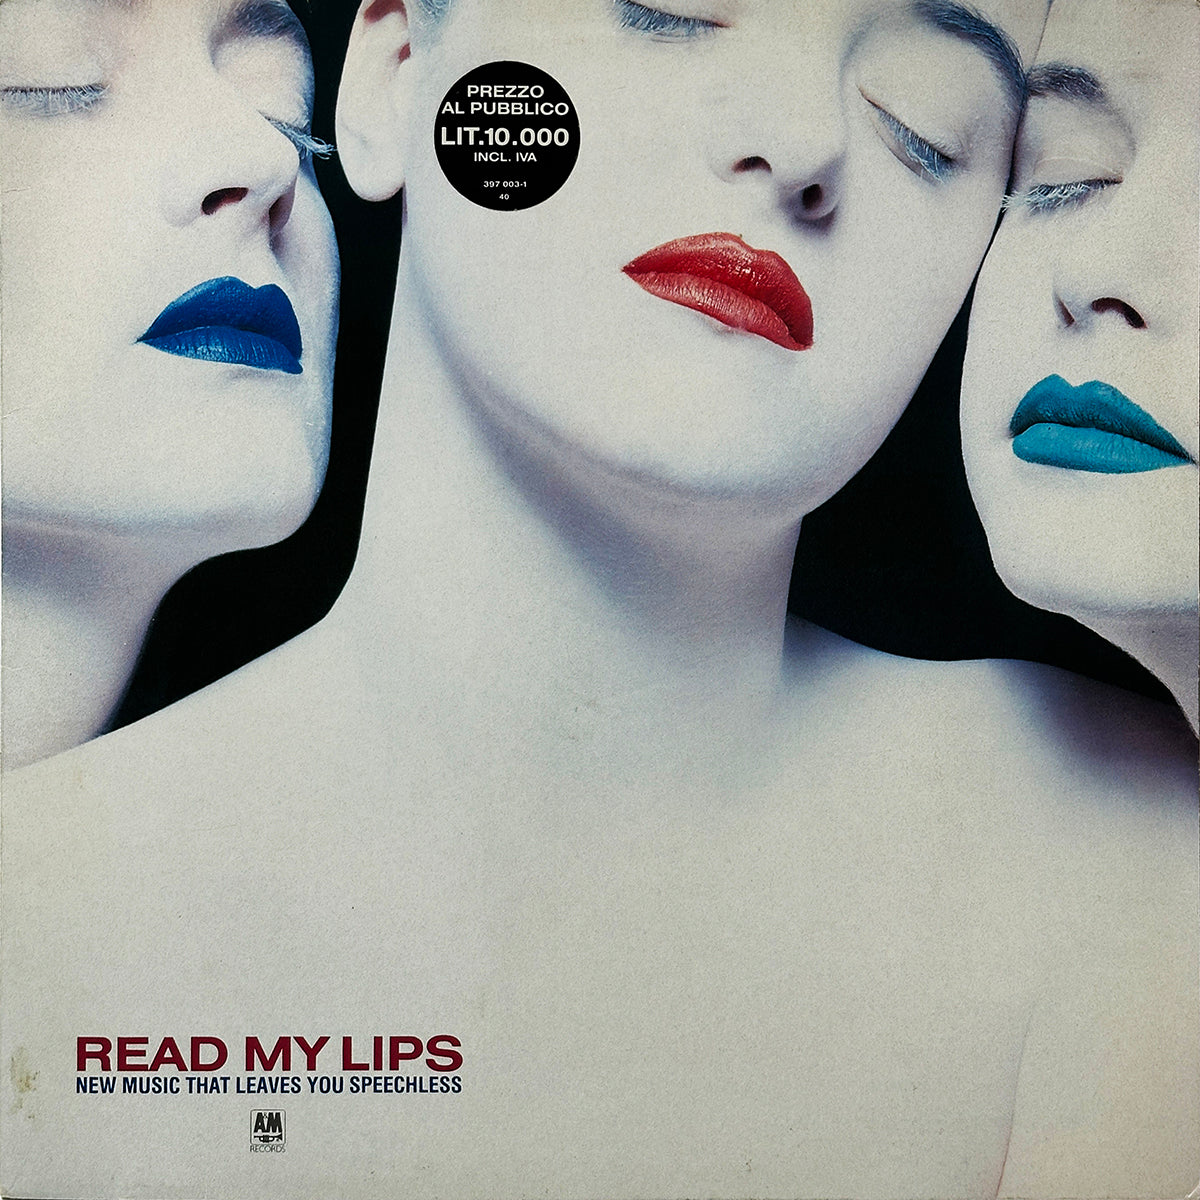 Read My Lips (New Music That Leaves You Speechless)